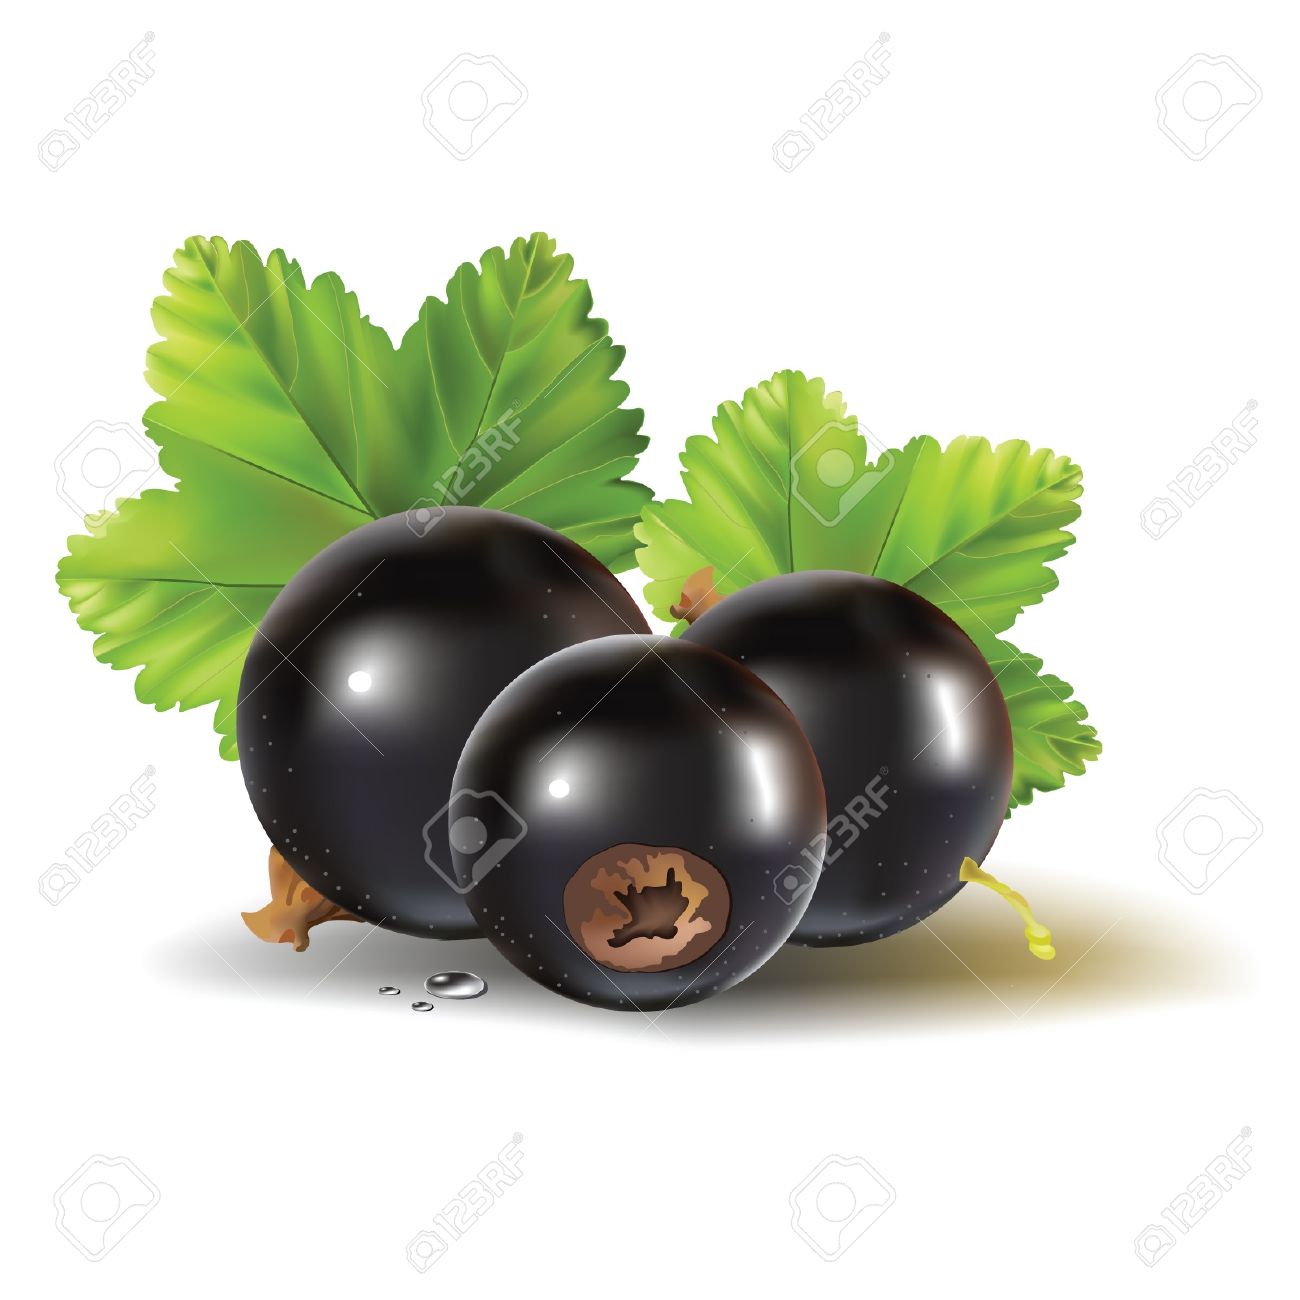 Black Currant Royalty Free Cliparts, Vectors, And Stock.